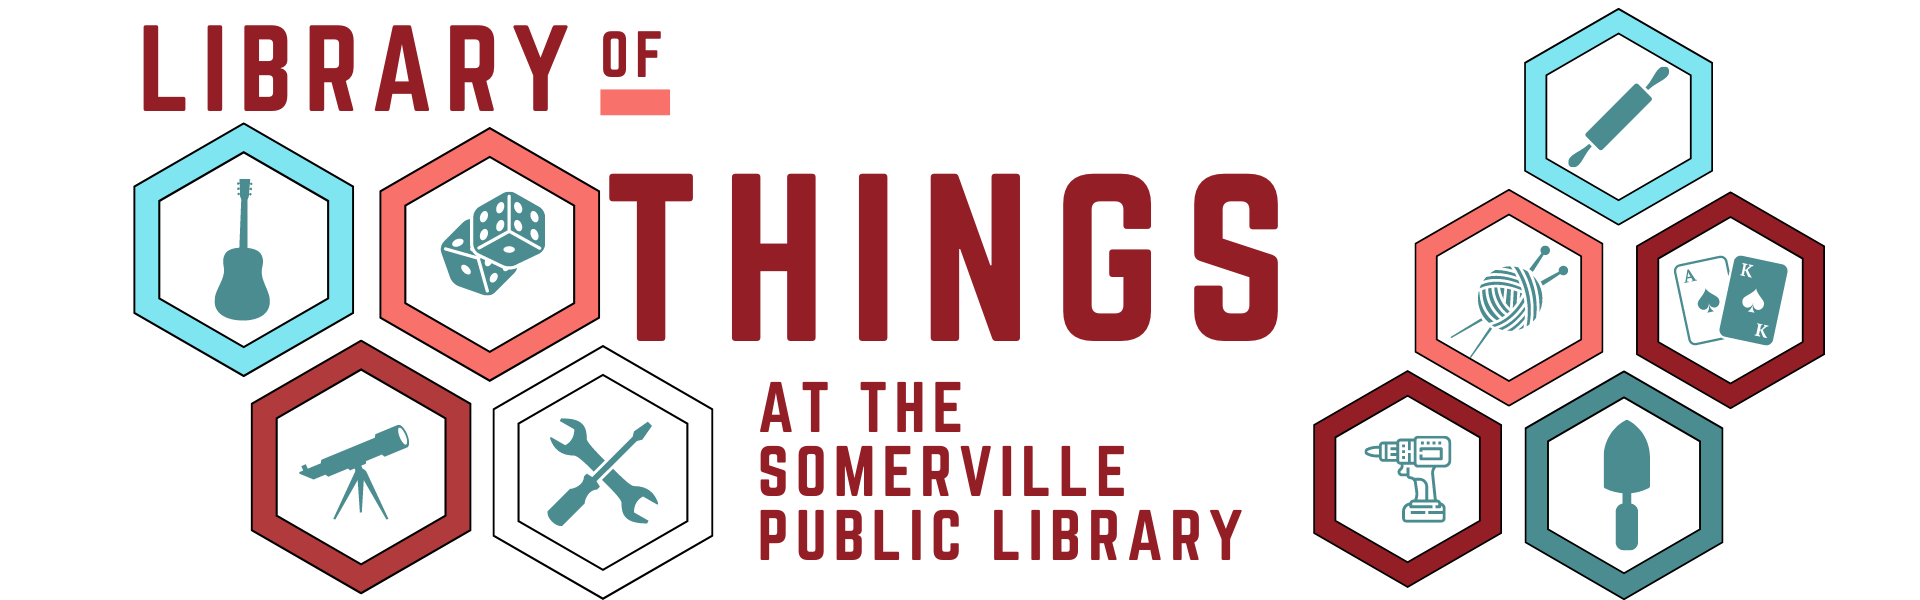 Library of things at the Somerville public library